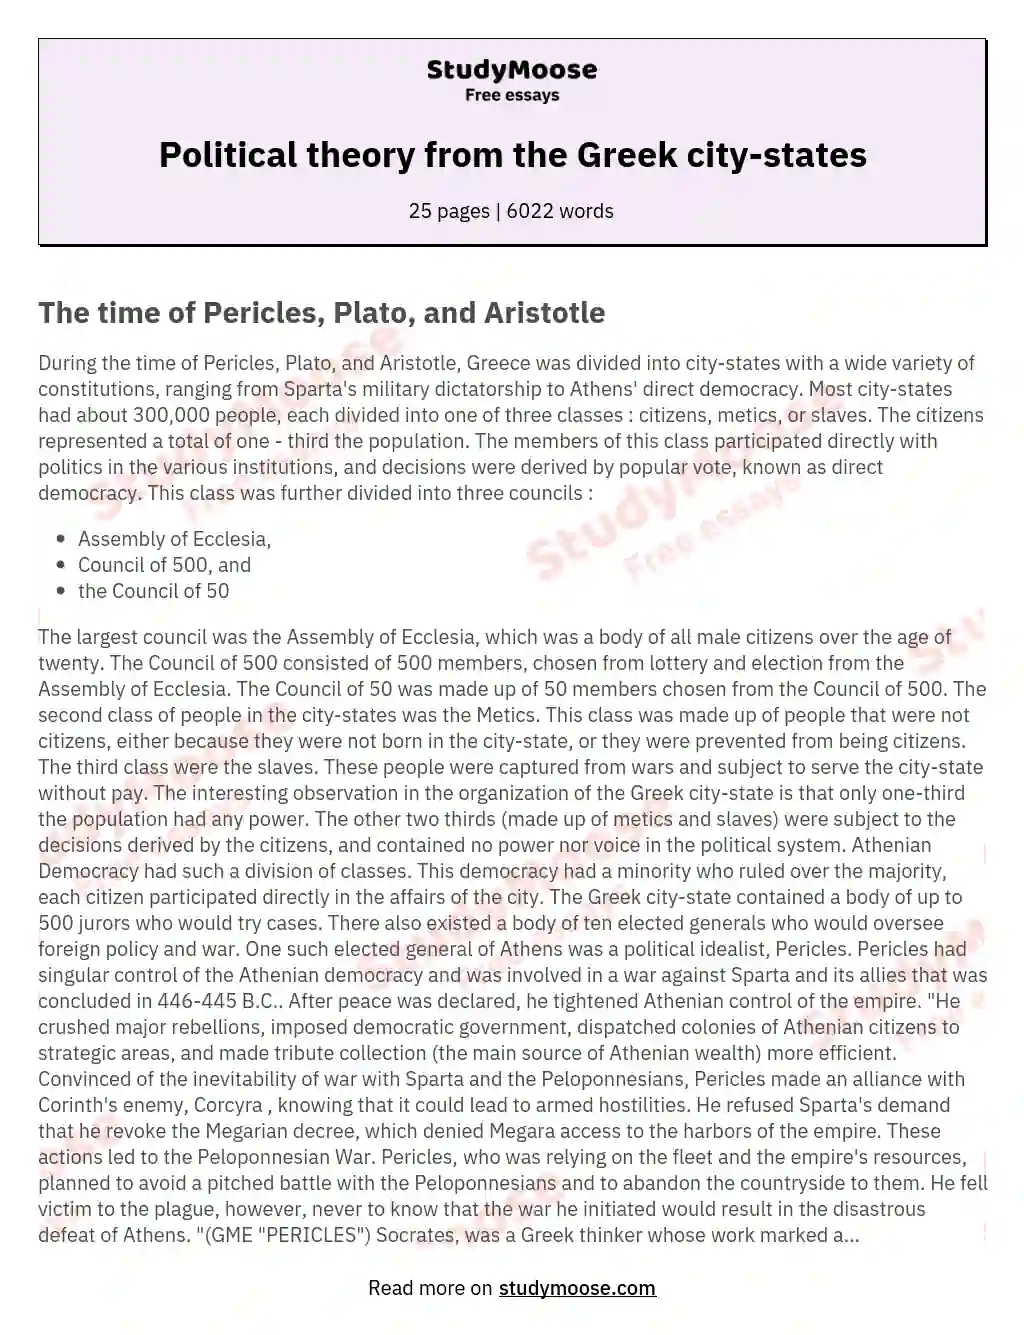 Political theory from the Greek city-states essay